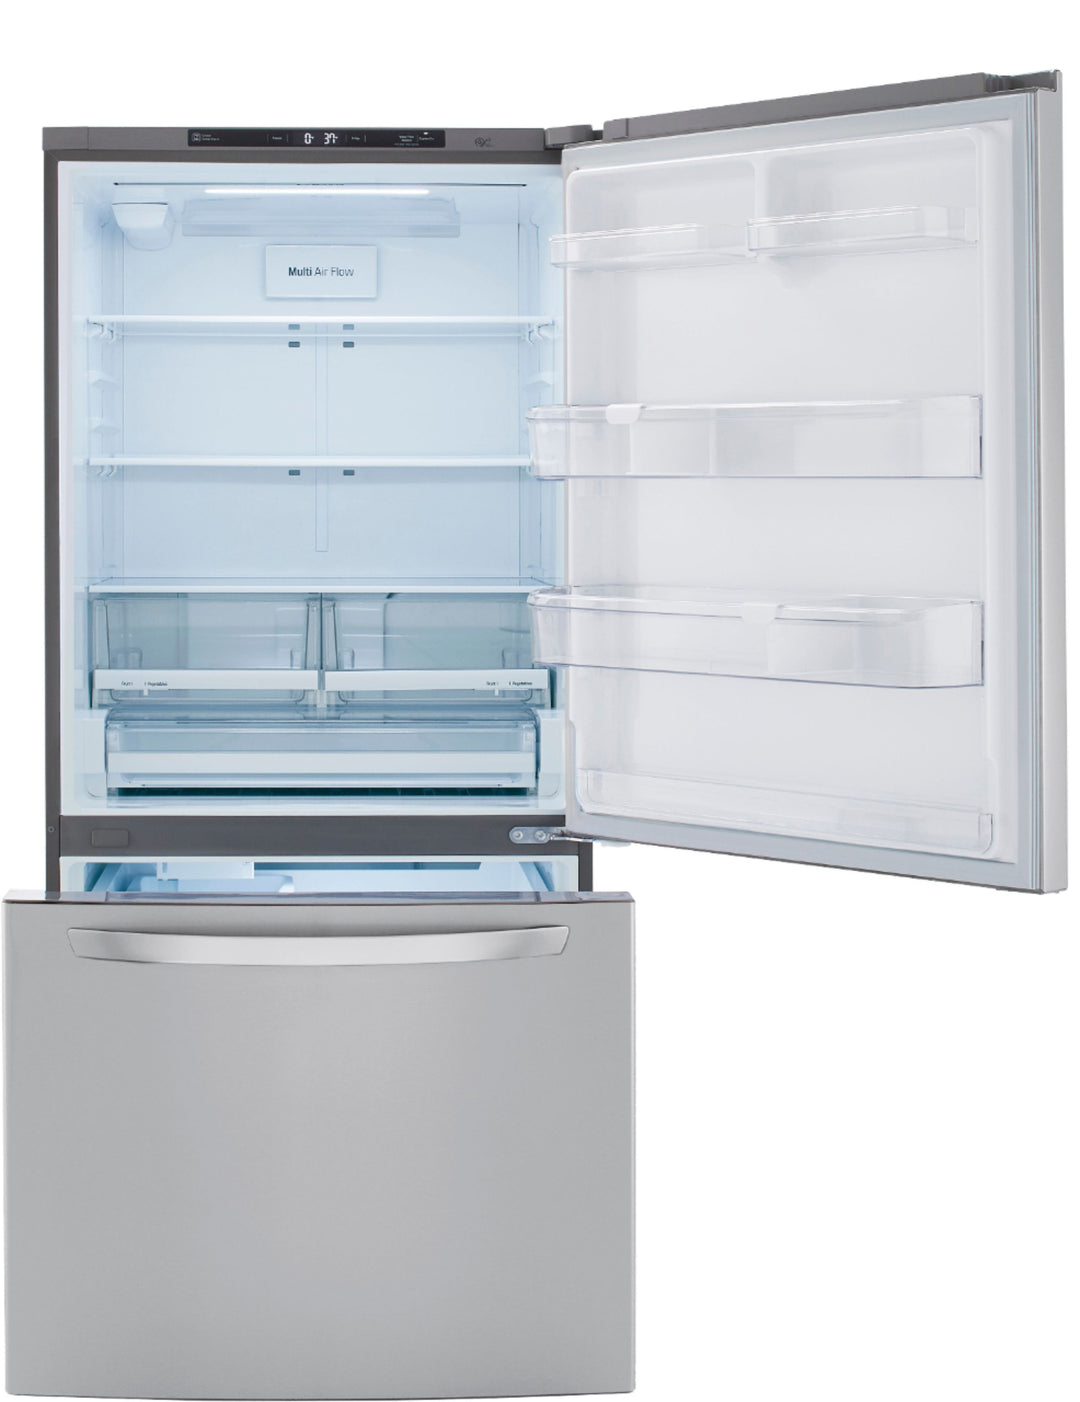 LG - 25.5 Cu. Ft. Bottom-Freezer Refrigerator with Ice Maker - Stainless steel_5